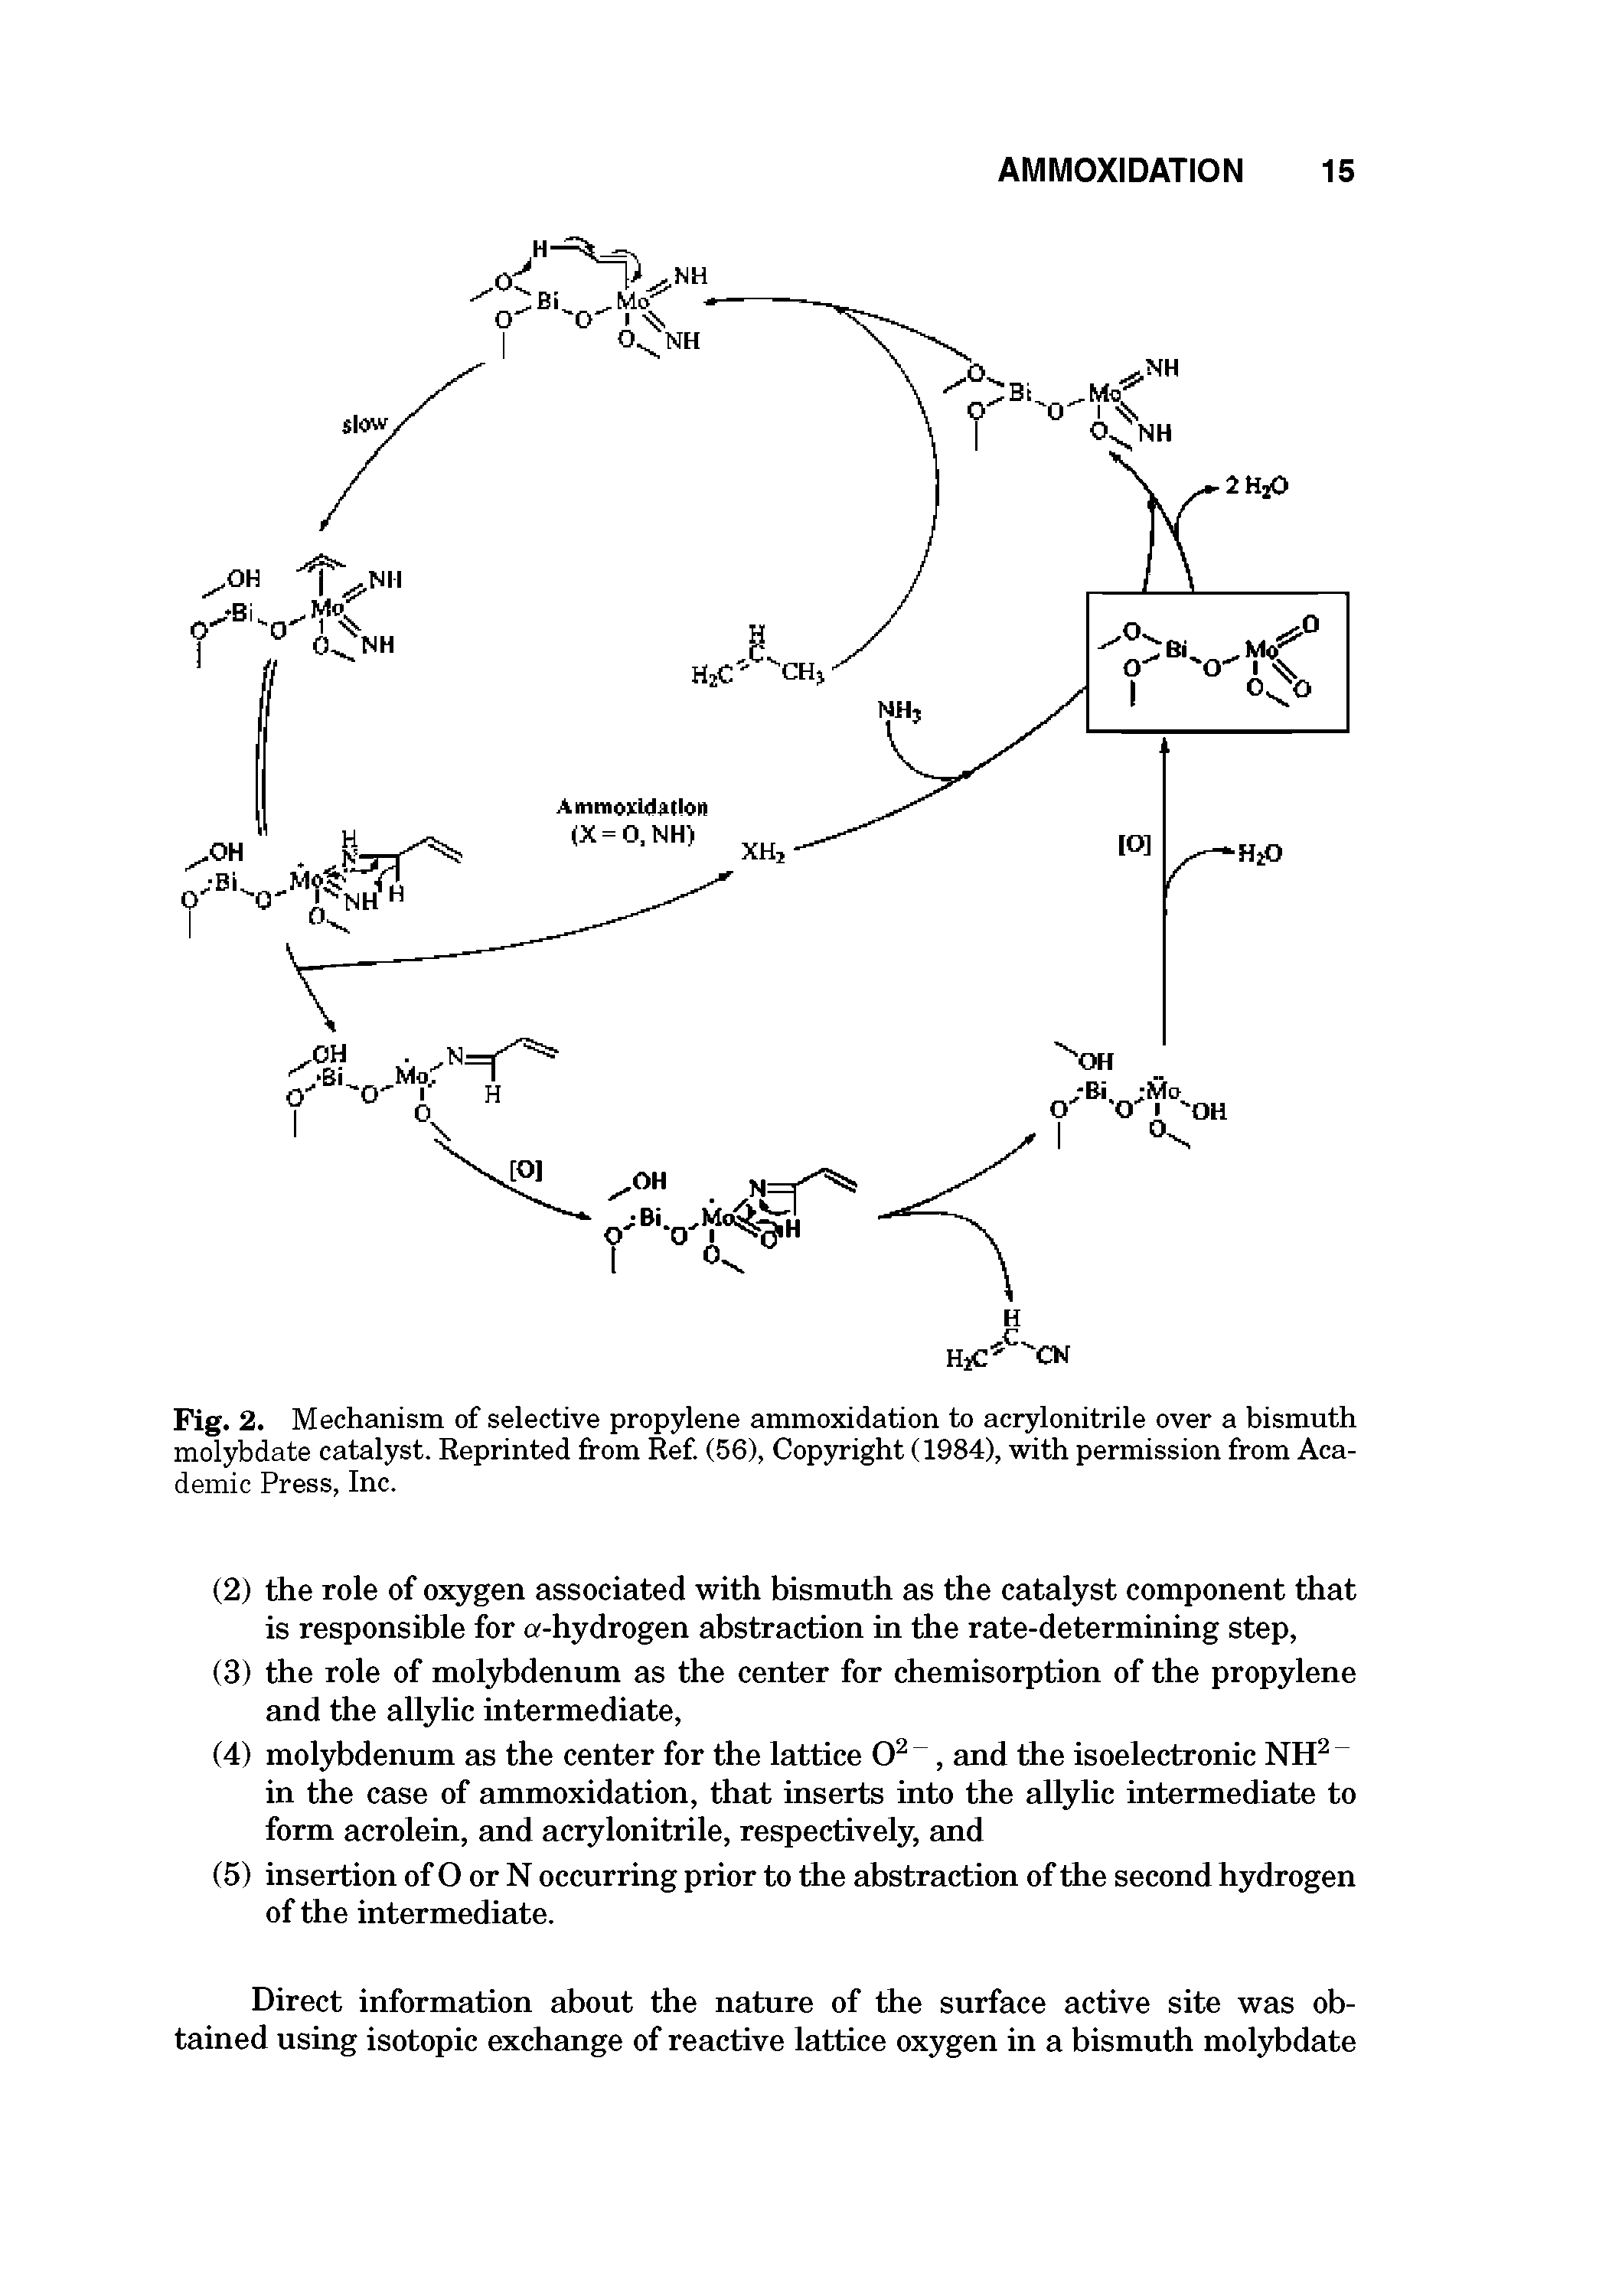 Fig. 2. Mechanism of selective propylene ammoxidation to acrylonitrile over a bismuth molybdate catalyst. Reprinted from Ref. (56), Copyright (1984), with permission from Academic Press, Inc.